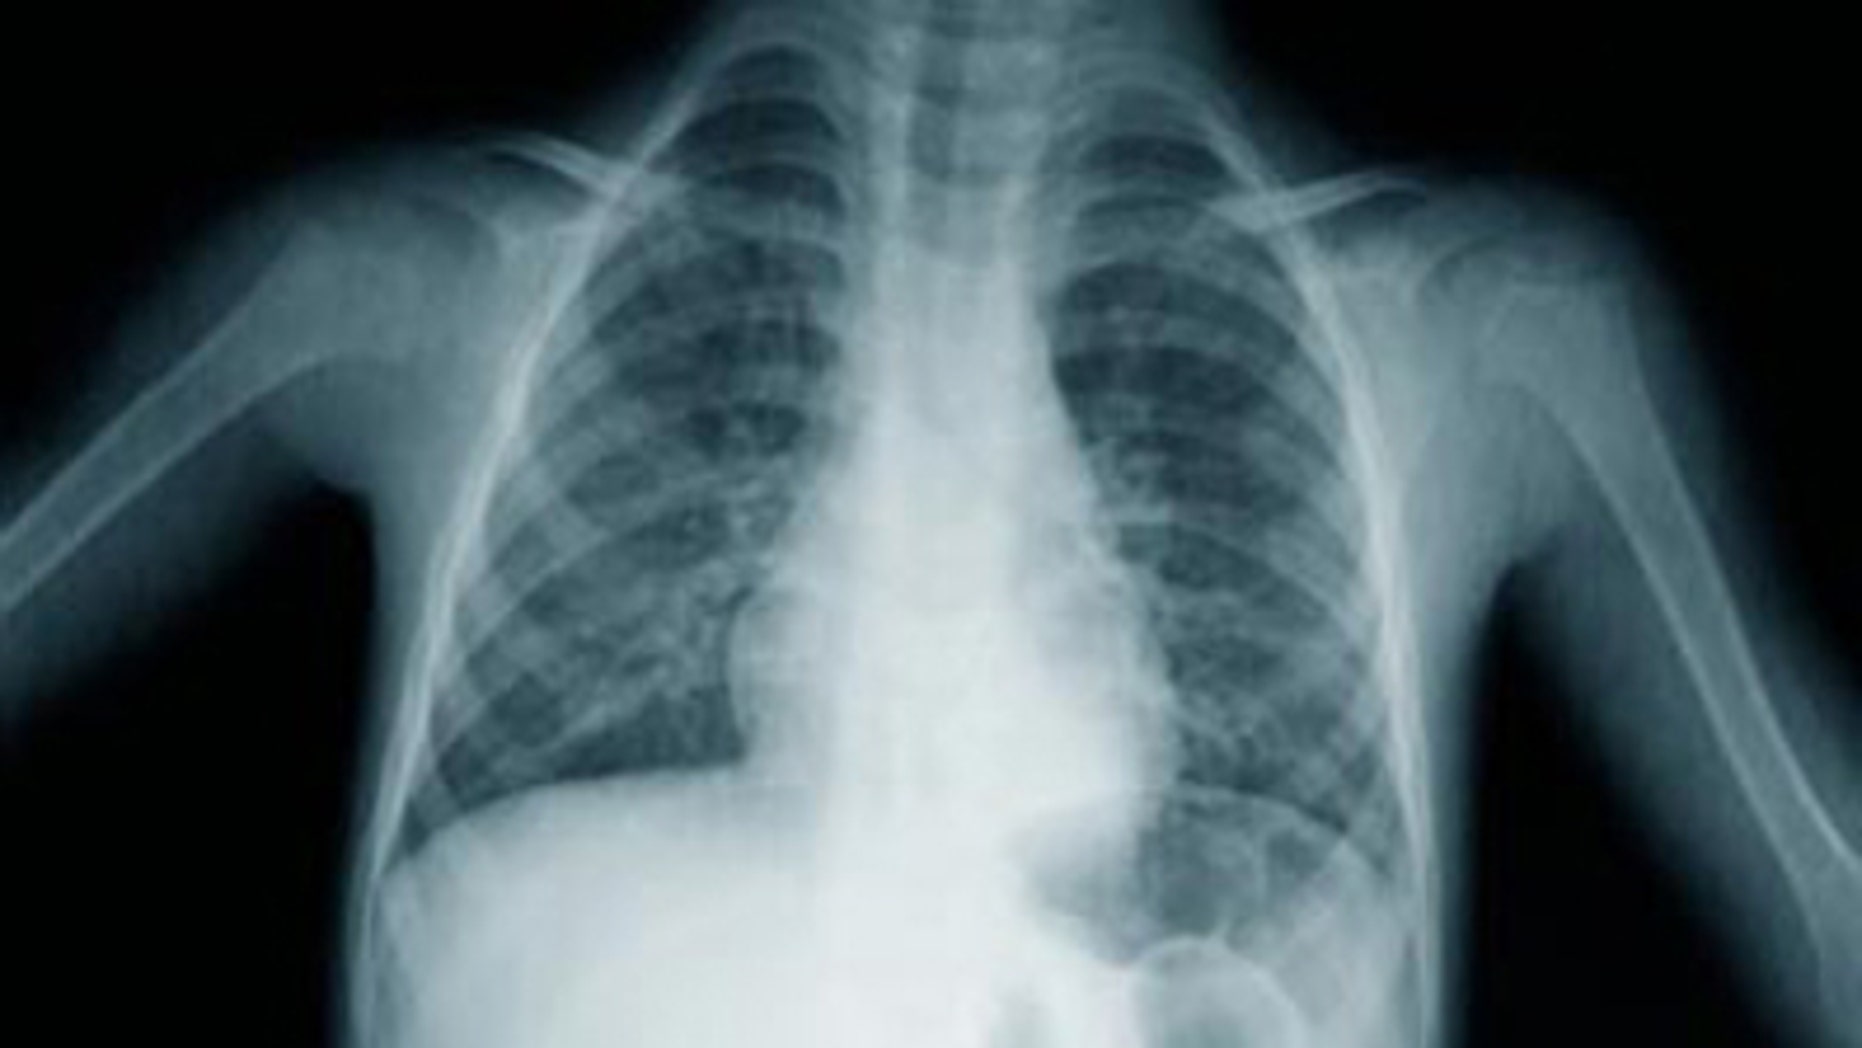 X Ray Lung Cancer Screening Does Not Prevent Deaths Fox News